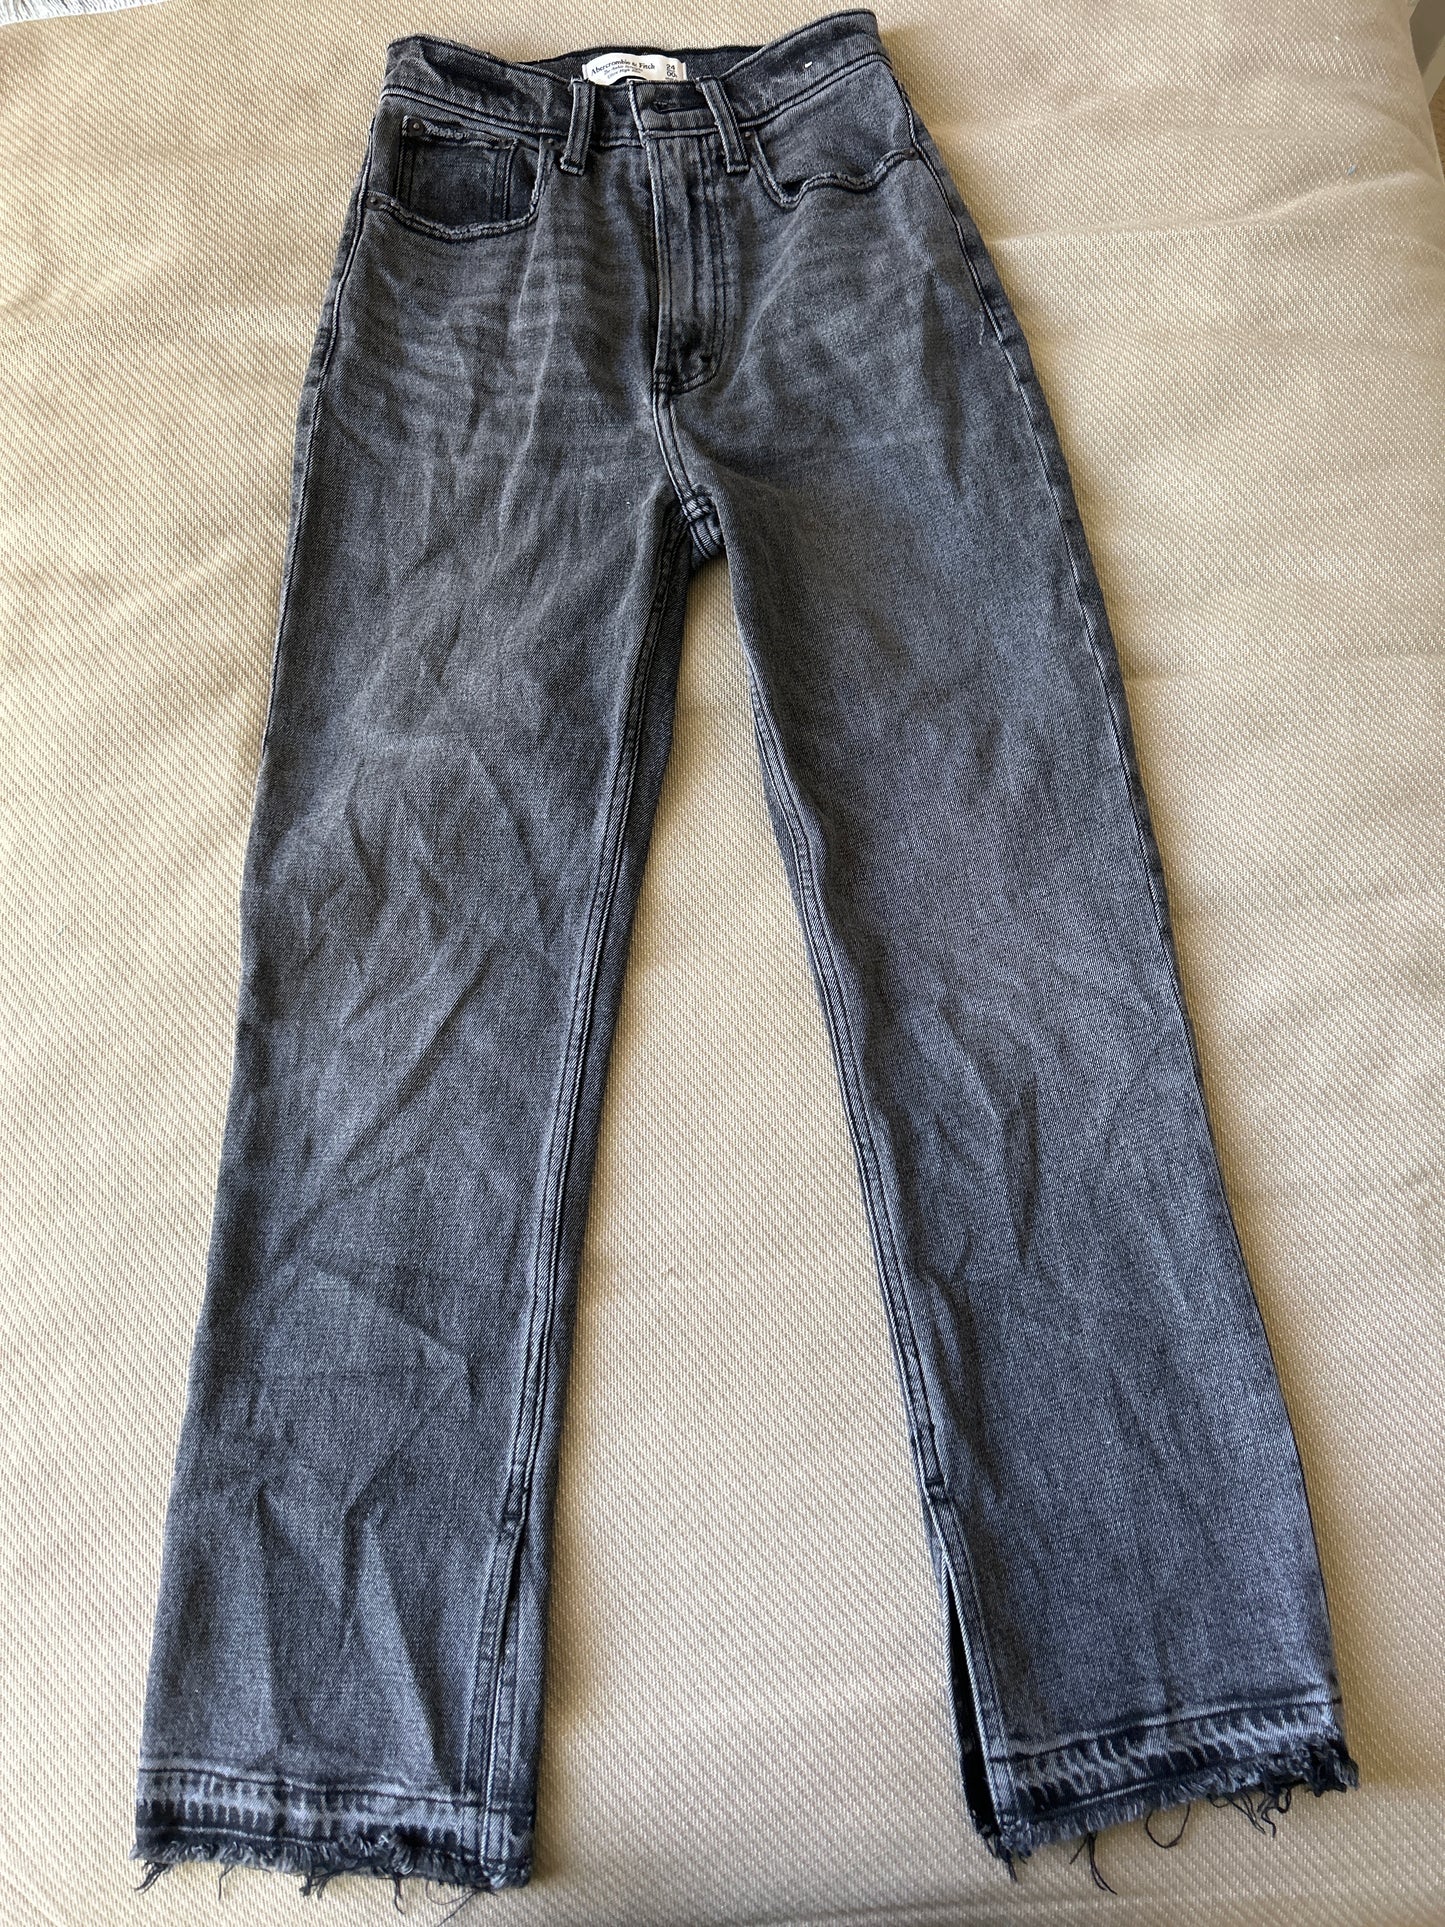 Abercrombie & Fitch Jeans/Size 24/00R